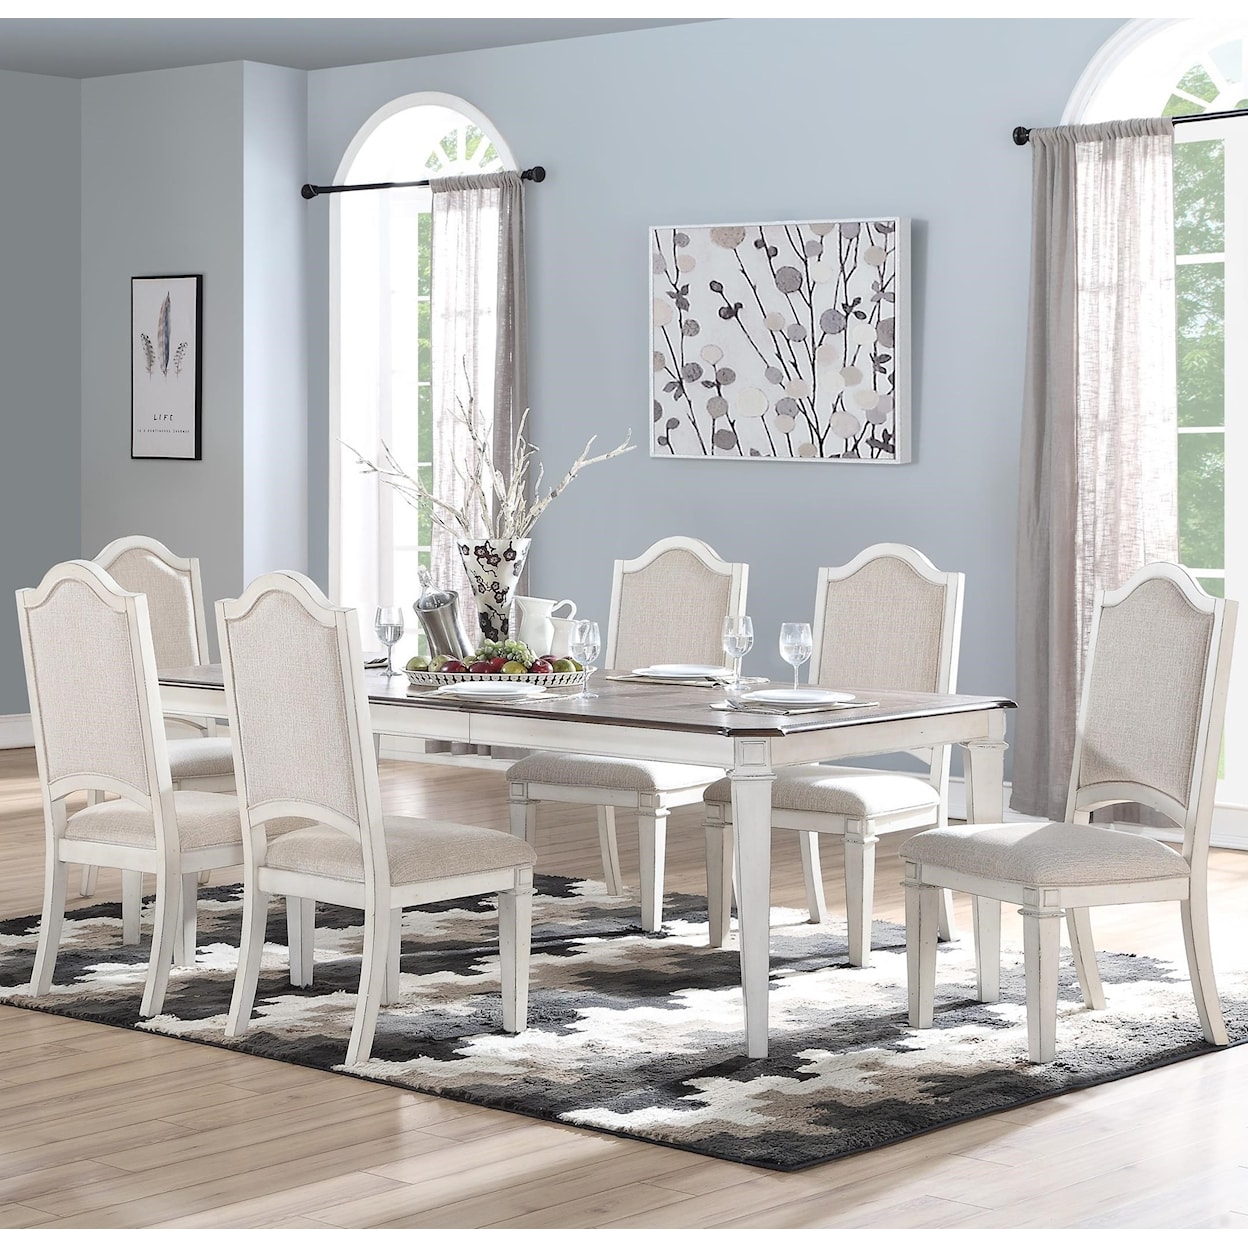 New Classic Anastasia 7-Piece Table and Chair Set